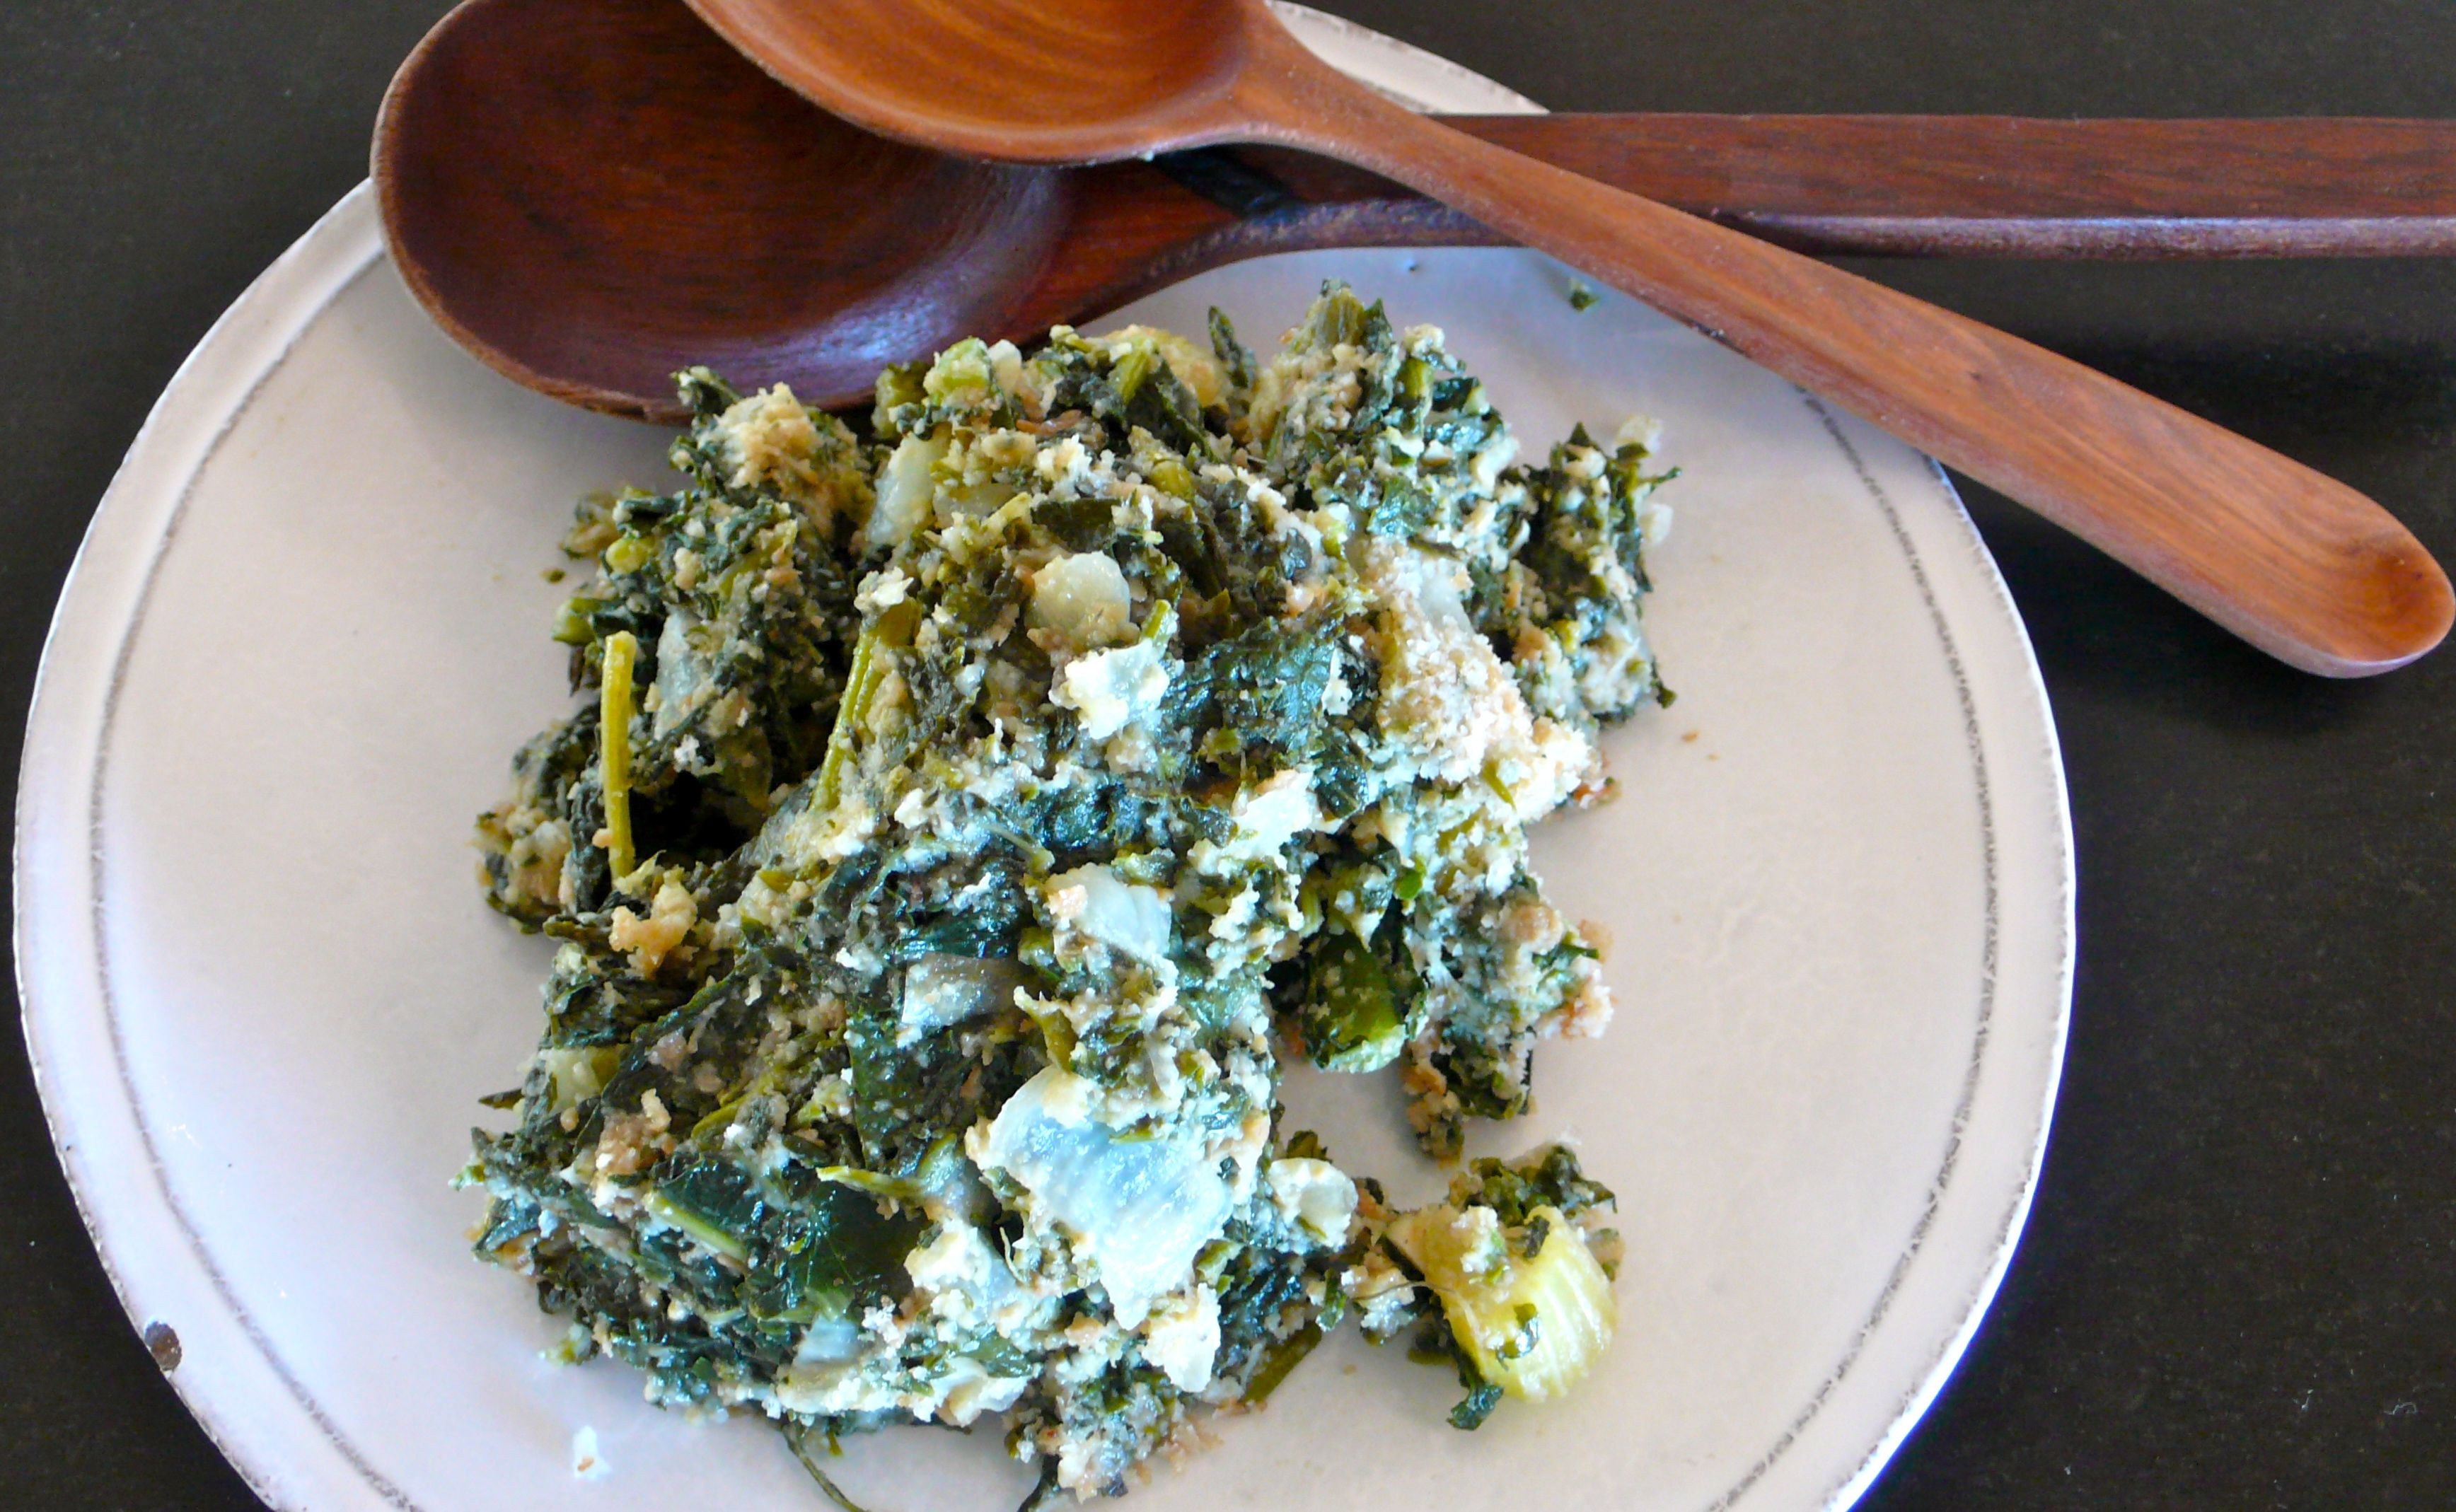 Kale Thanksgiving Recipes
 SPINACH KALE STUFFING DRESSING not just for